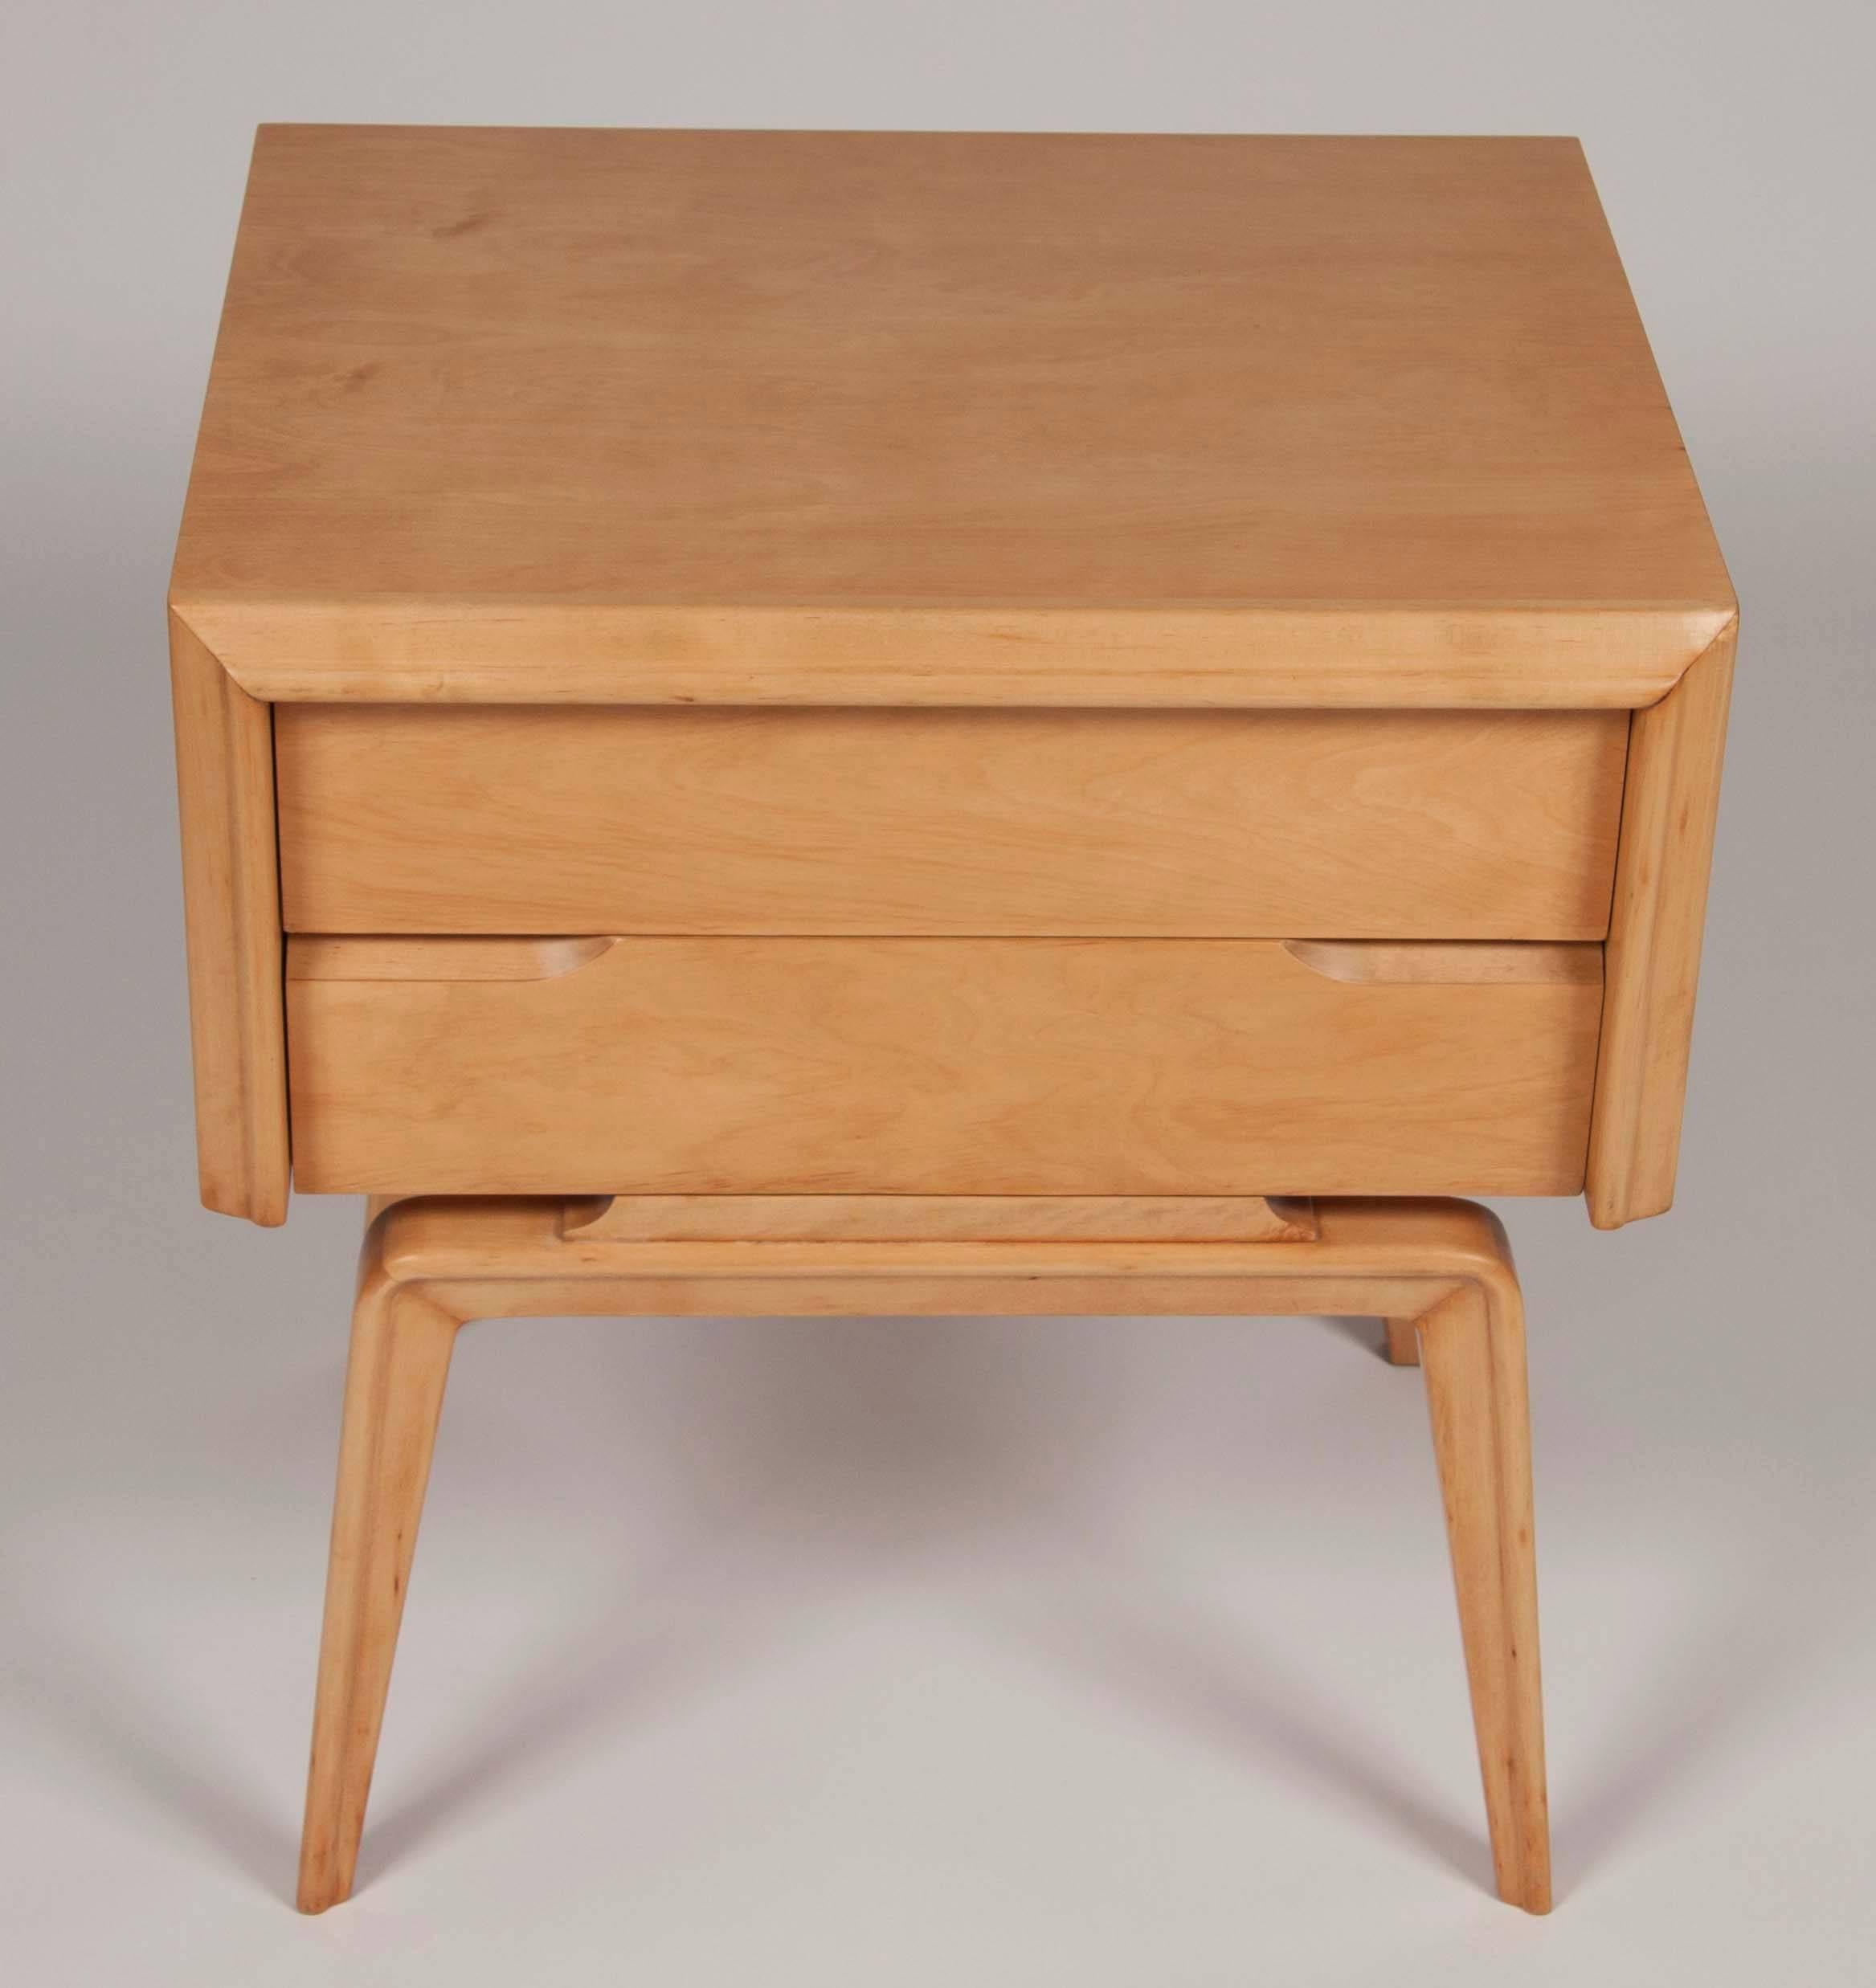 Woodwork Pair of Bedside Tables by Edmond Spence